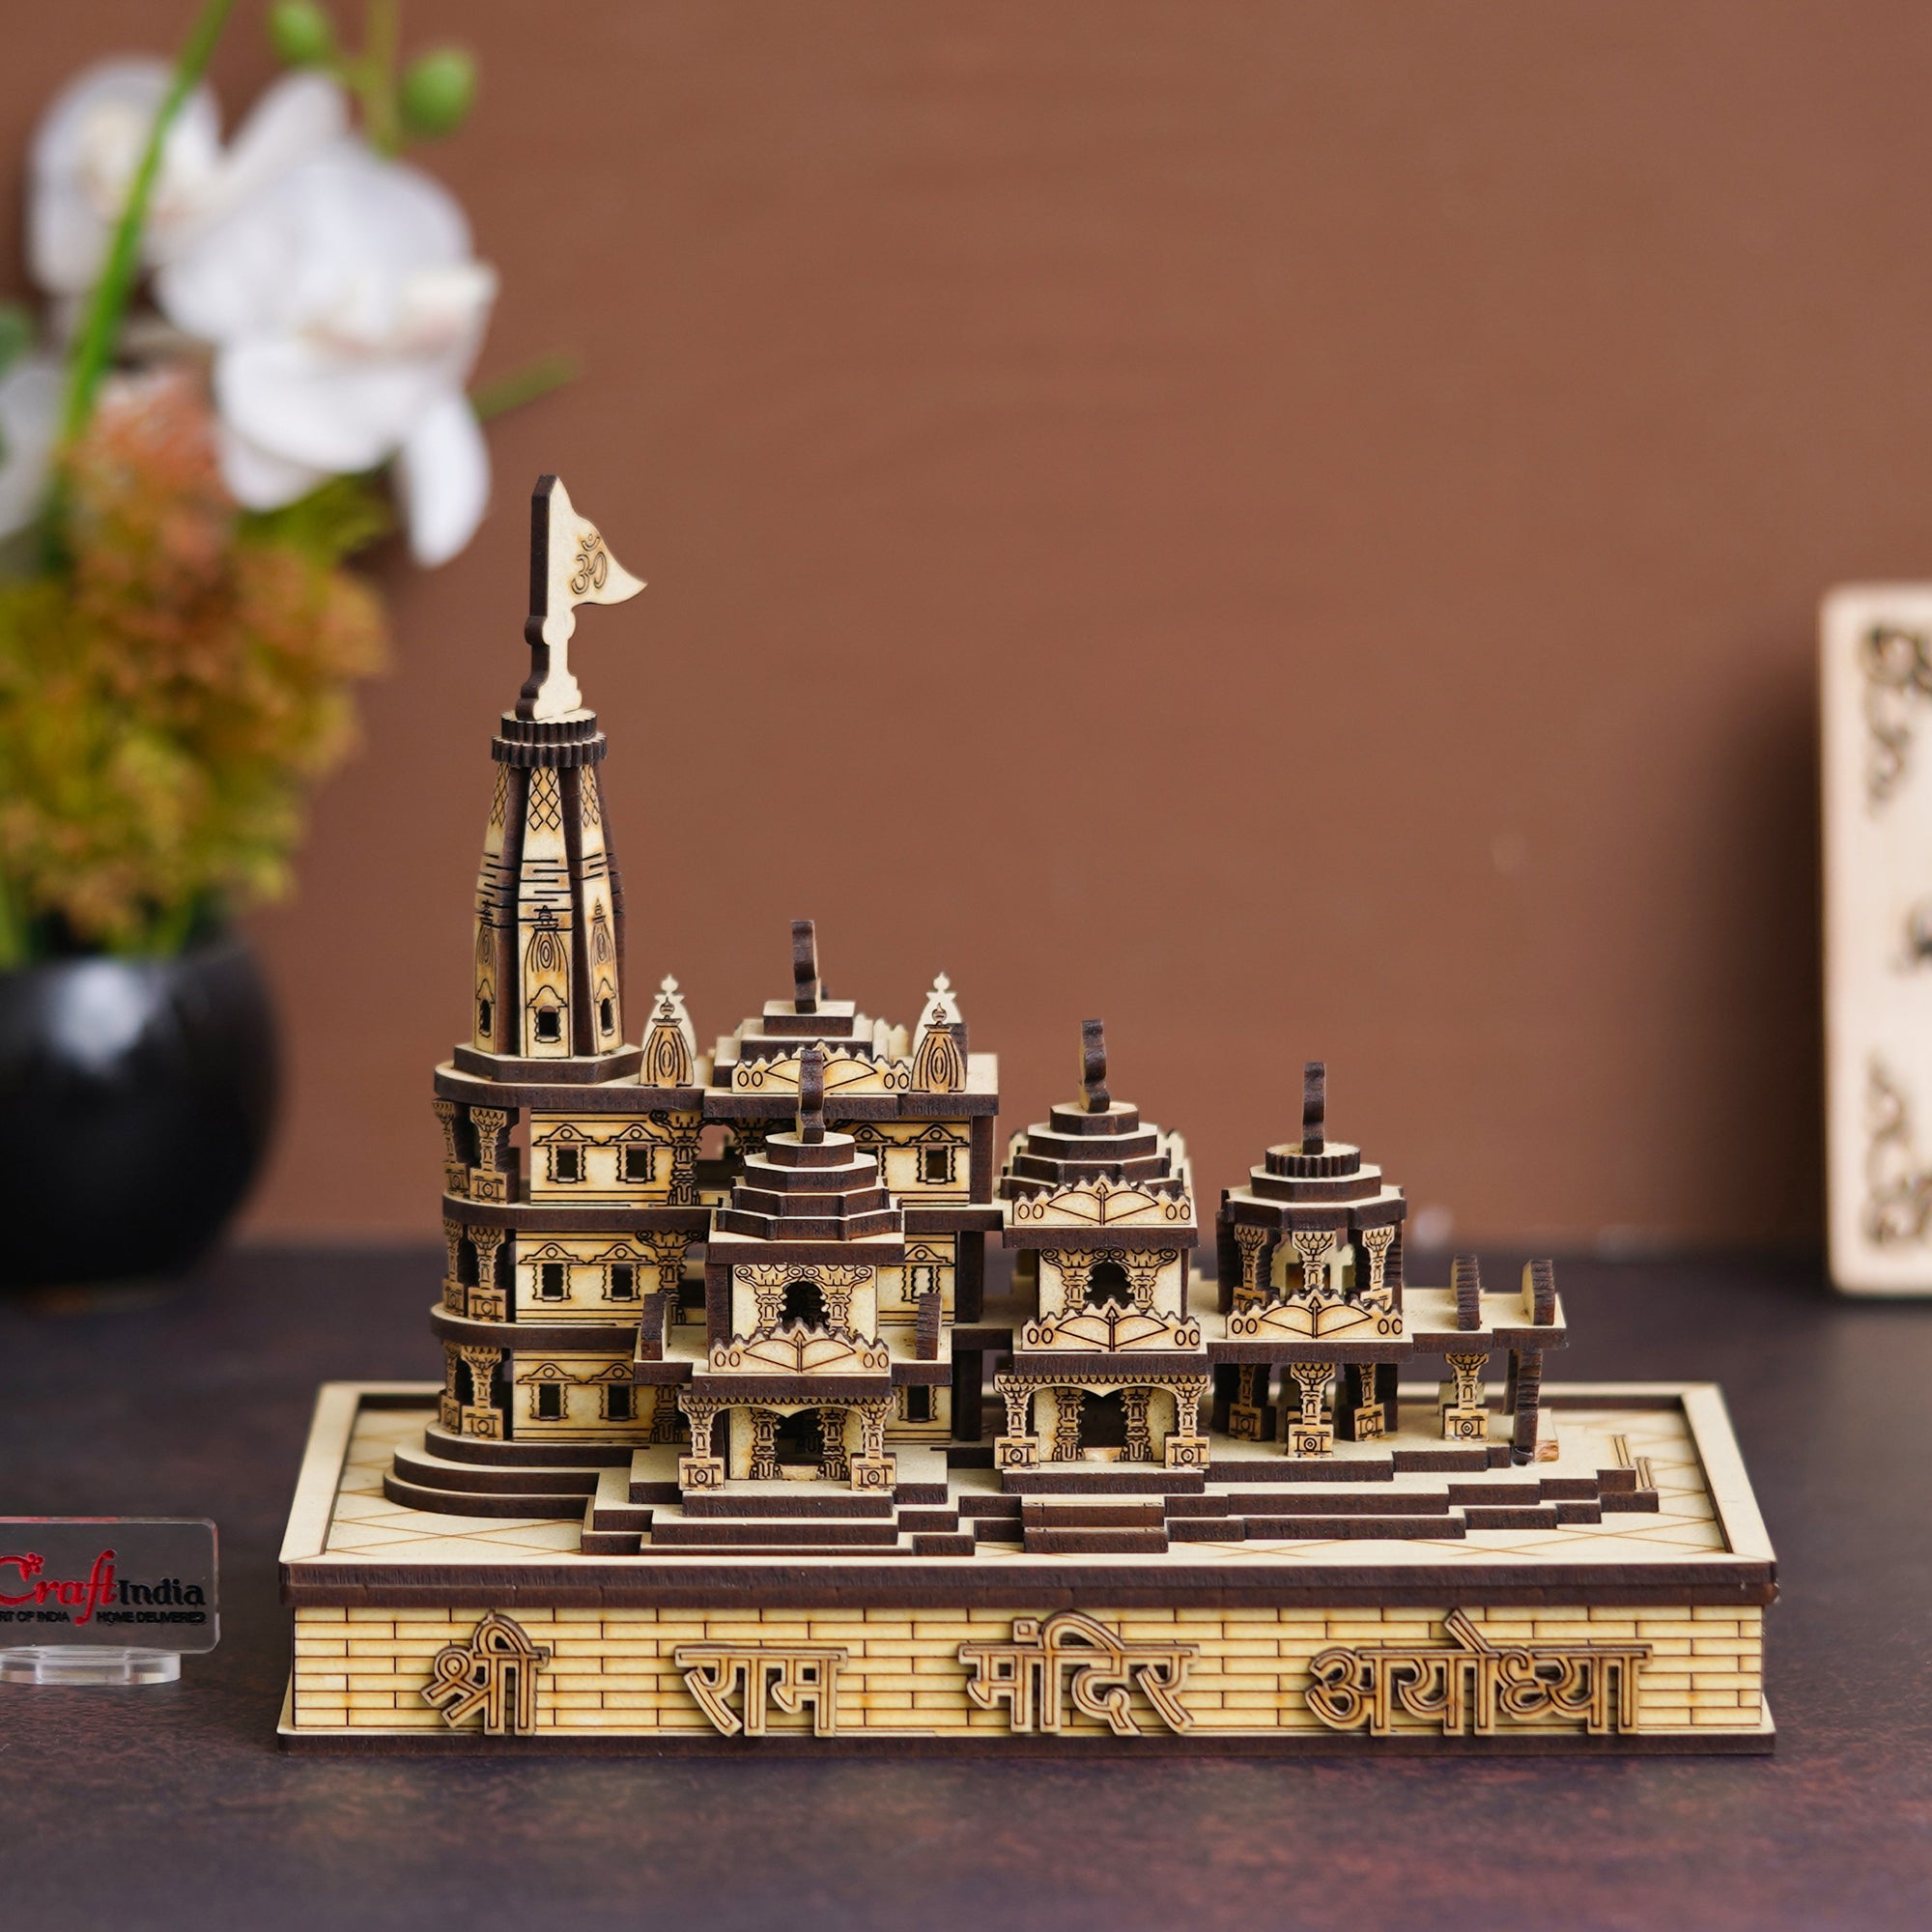 eCraftIndia Shri Ram Mandir Ayodhya Model with Light and Power Adapter - Wooden MDF Craftsmanship Authentic Designer Temple with Protective Gift Box - Ideal for Home Temple, Decor, and Spiritual Gifting 1